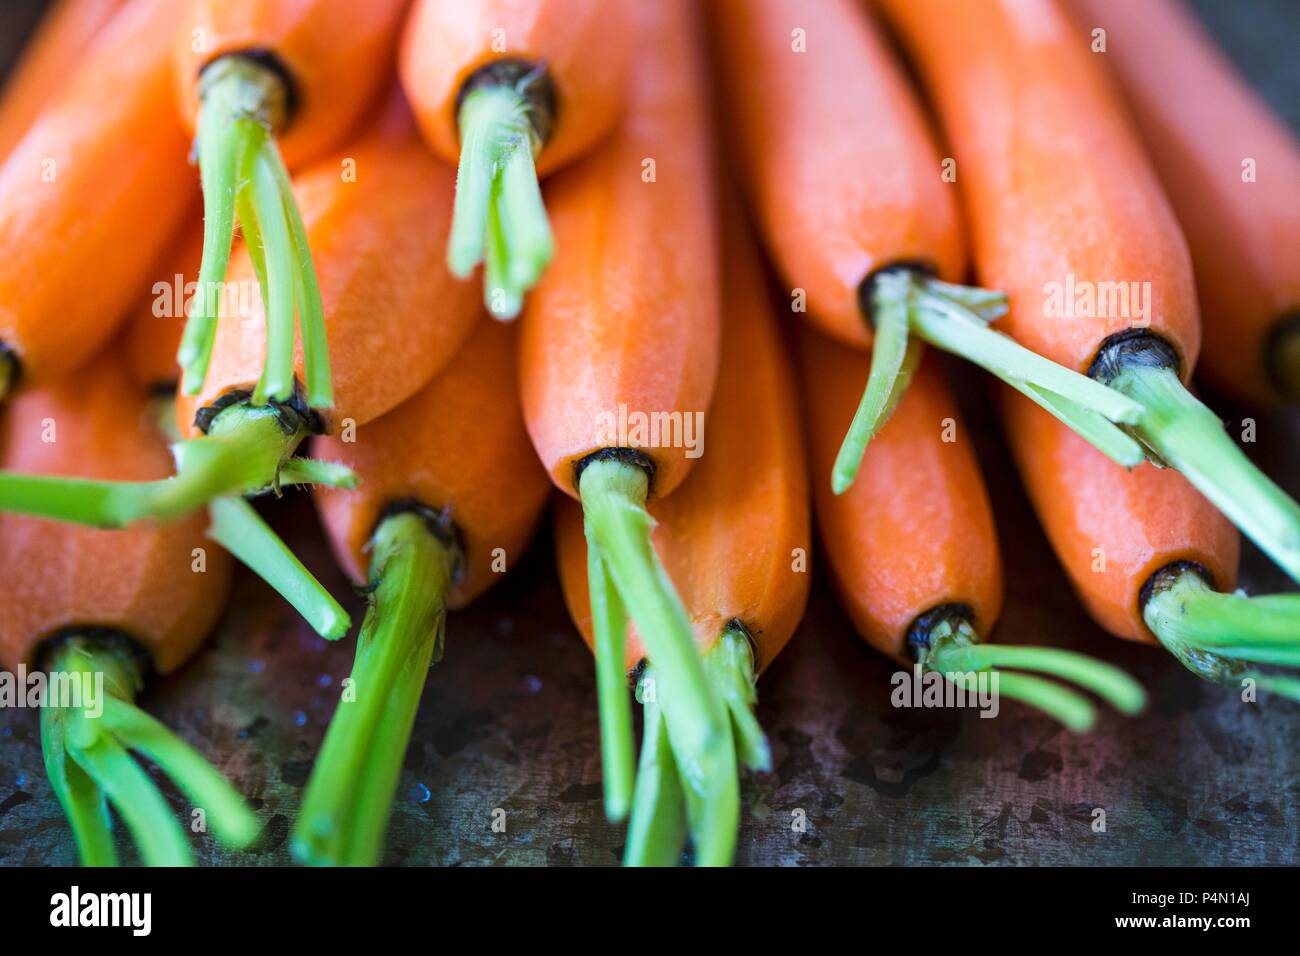 A stack of peeled carrots Stock Photo